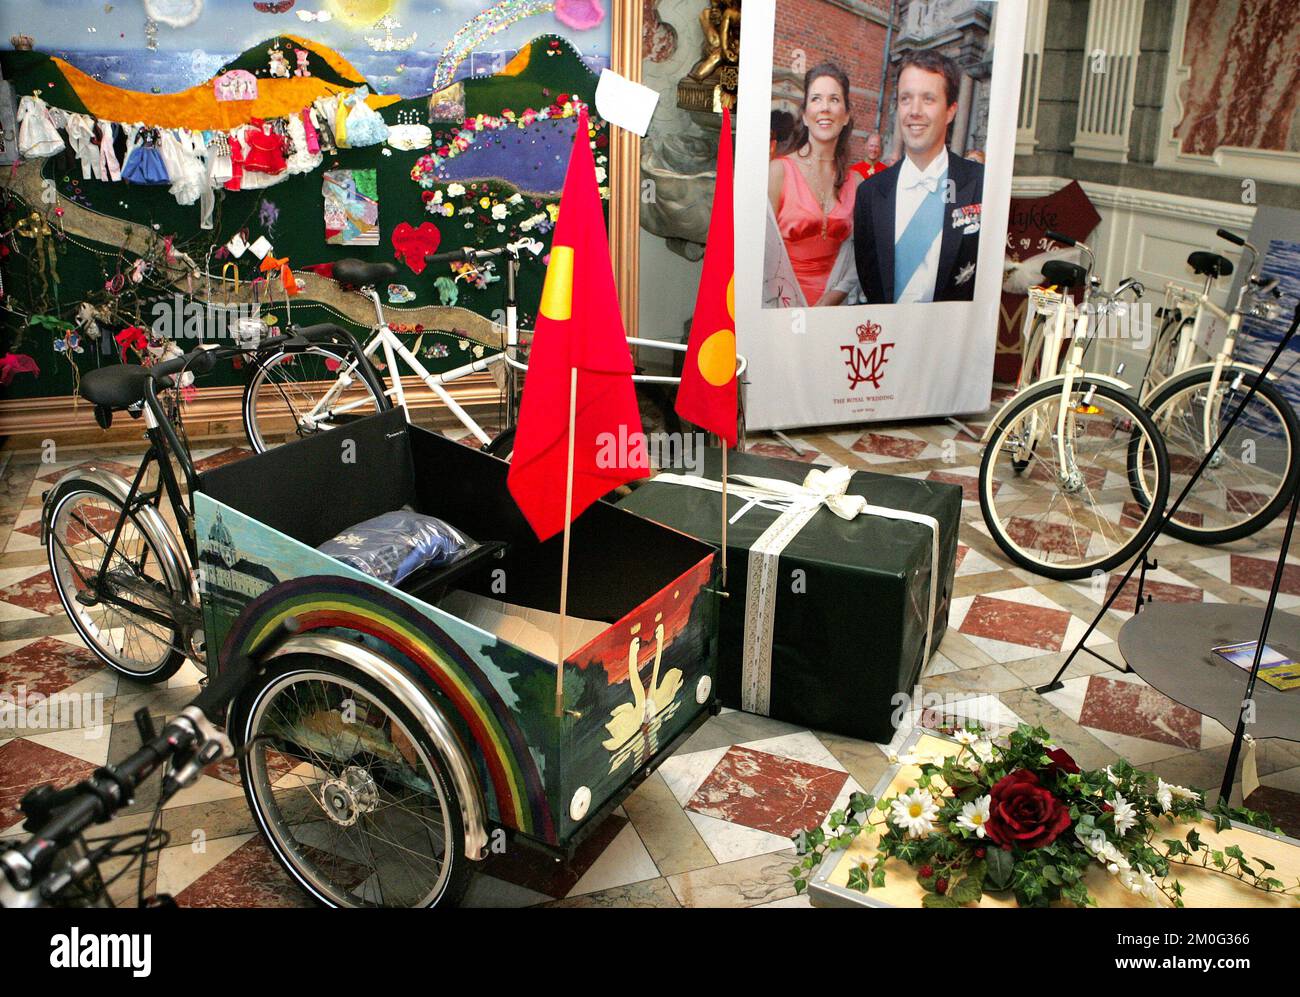 The Crown Prince Couple, Crown Prince Frederik and Crown Princess Mary, were gifted a Christiania bike on the occasion of their wedding in 2004. In June 2004, the newly wed royals exhibited their many gifts, including the Christiania bike, at Christiansborg in Copenhagen. Tuesday, June 15, 2004. Christiania Turns 50: Freetown Christiania first saw daylight on September 26, 1971, when a group of people in search for an alternative way of living occupied an abandoned military base on Christianshavn in Copenhagen. On Sunday, September 26, 2021, the self-proclaimed freetown celebrates its 50th bir Stock Photo